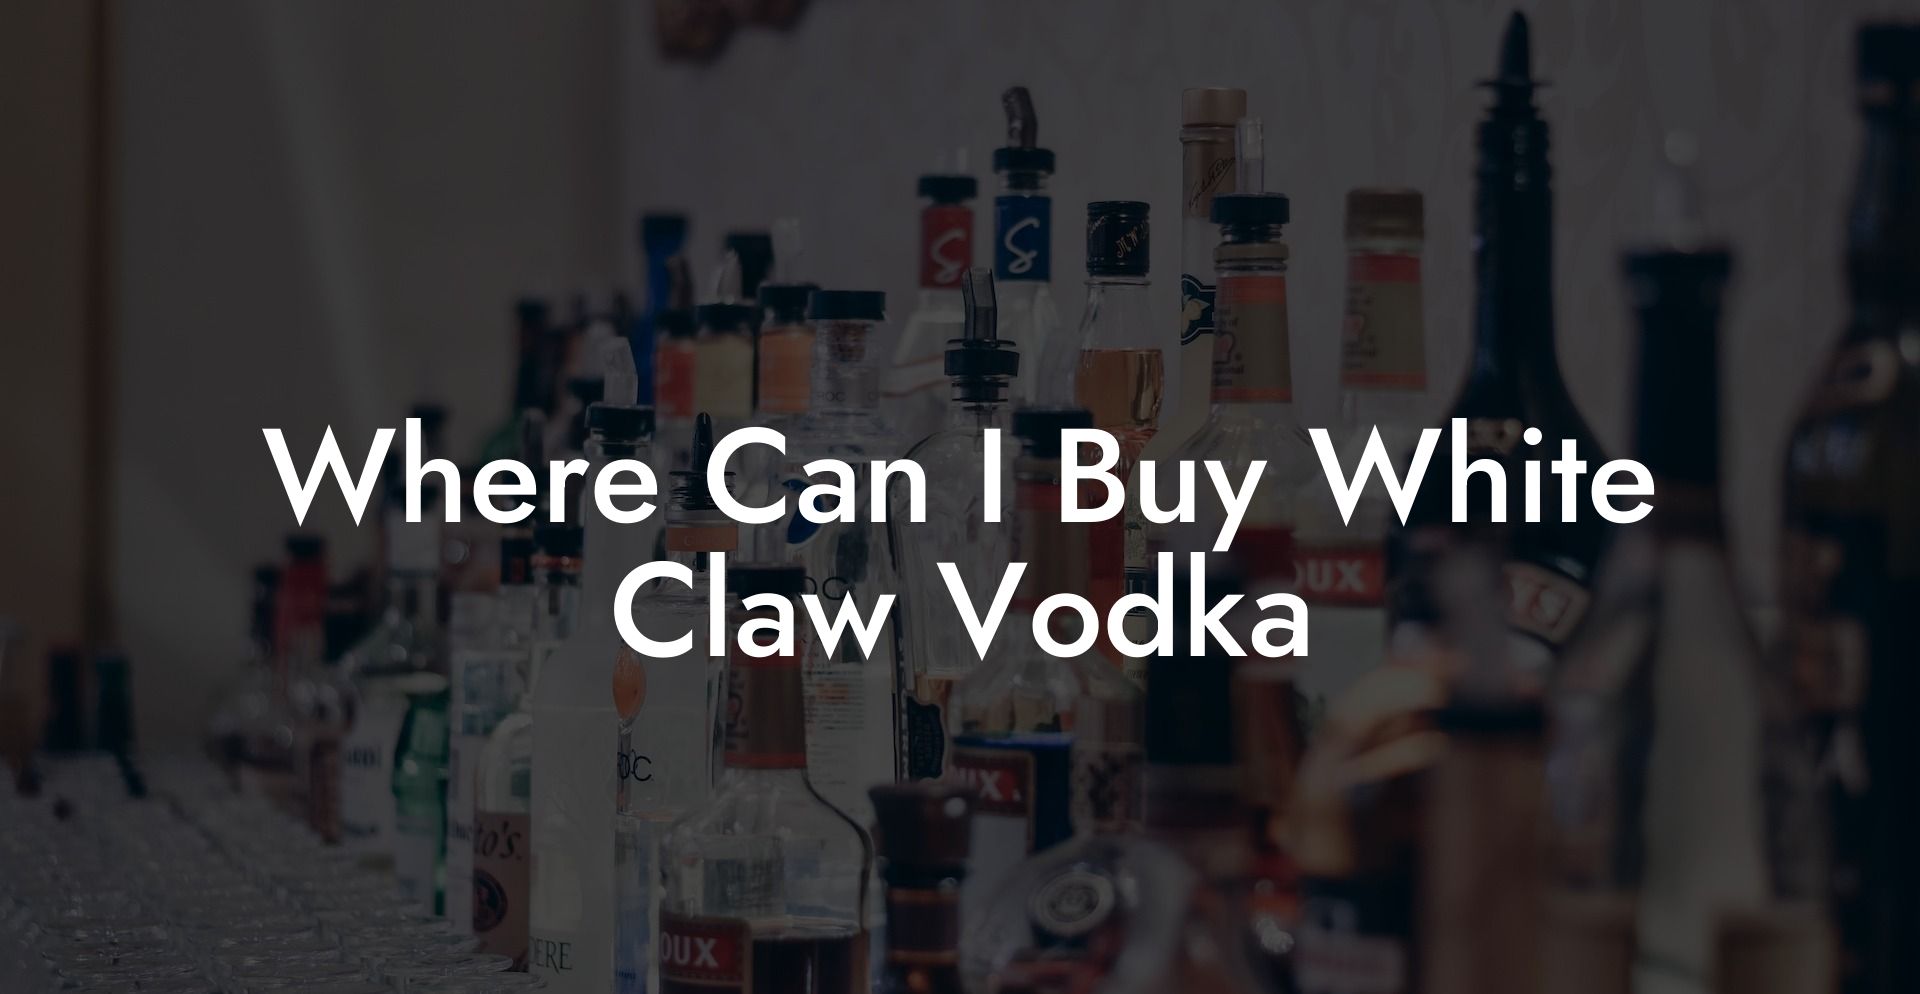 Where Can I Buy White Claw Vodka